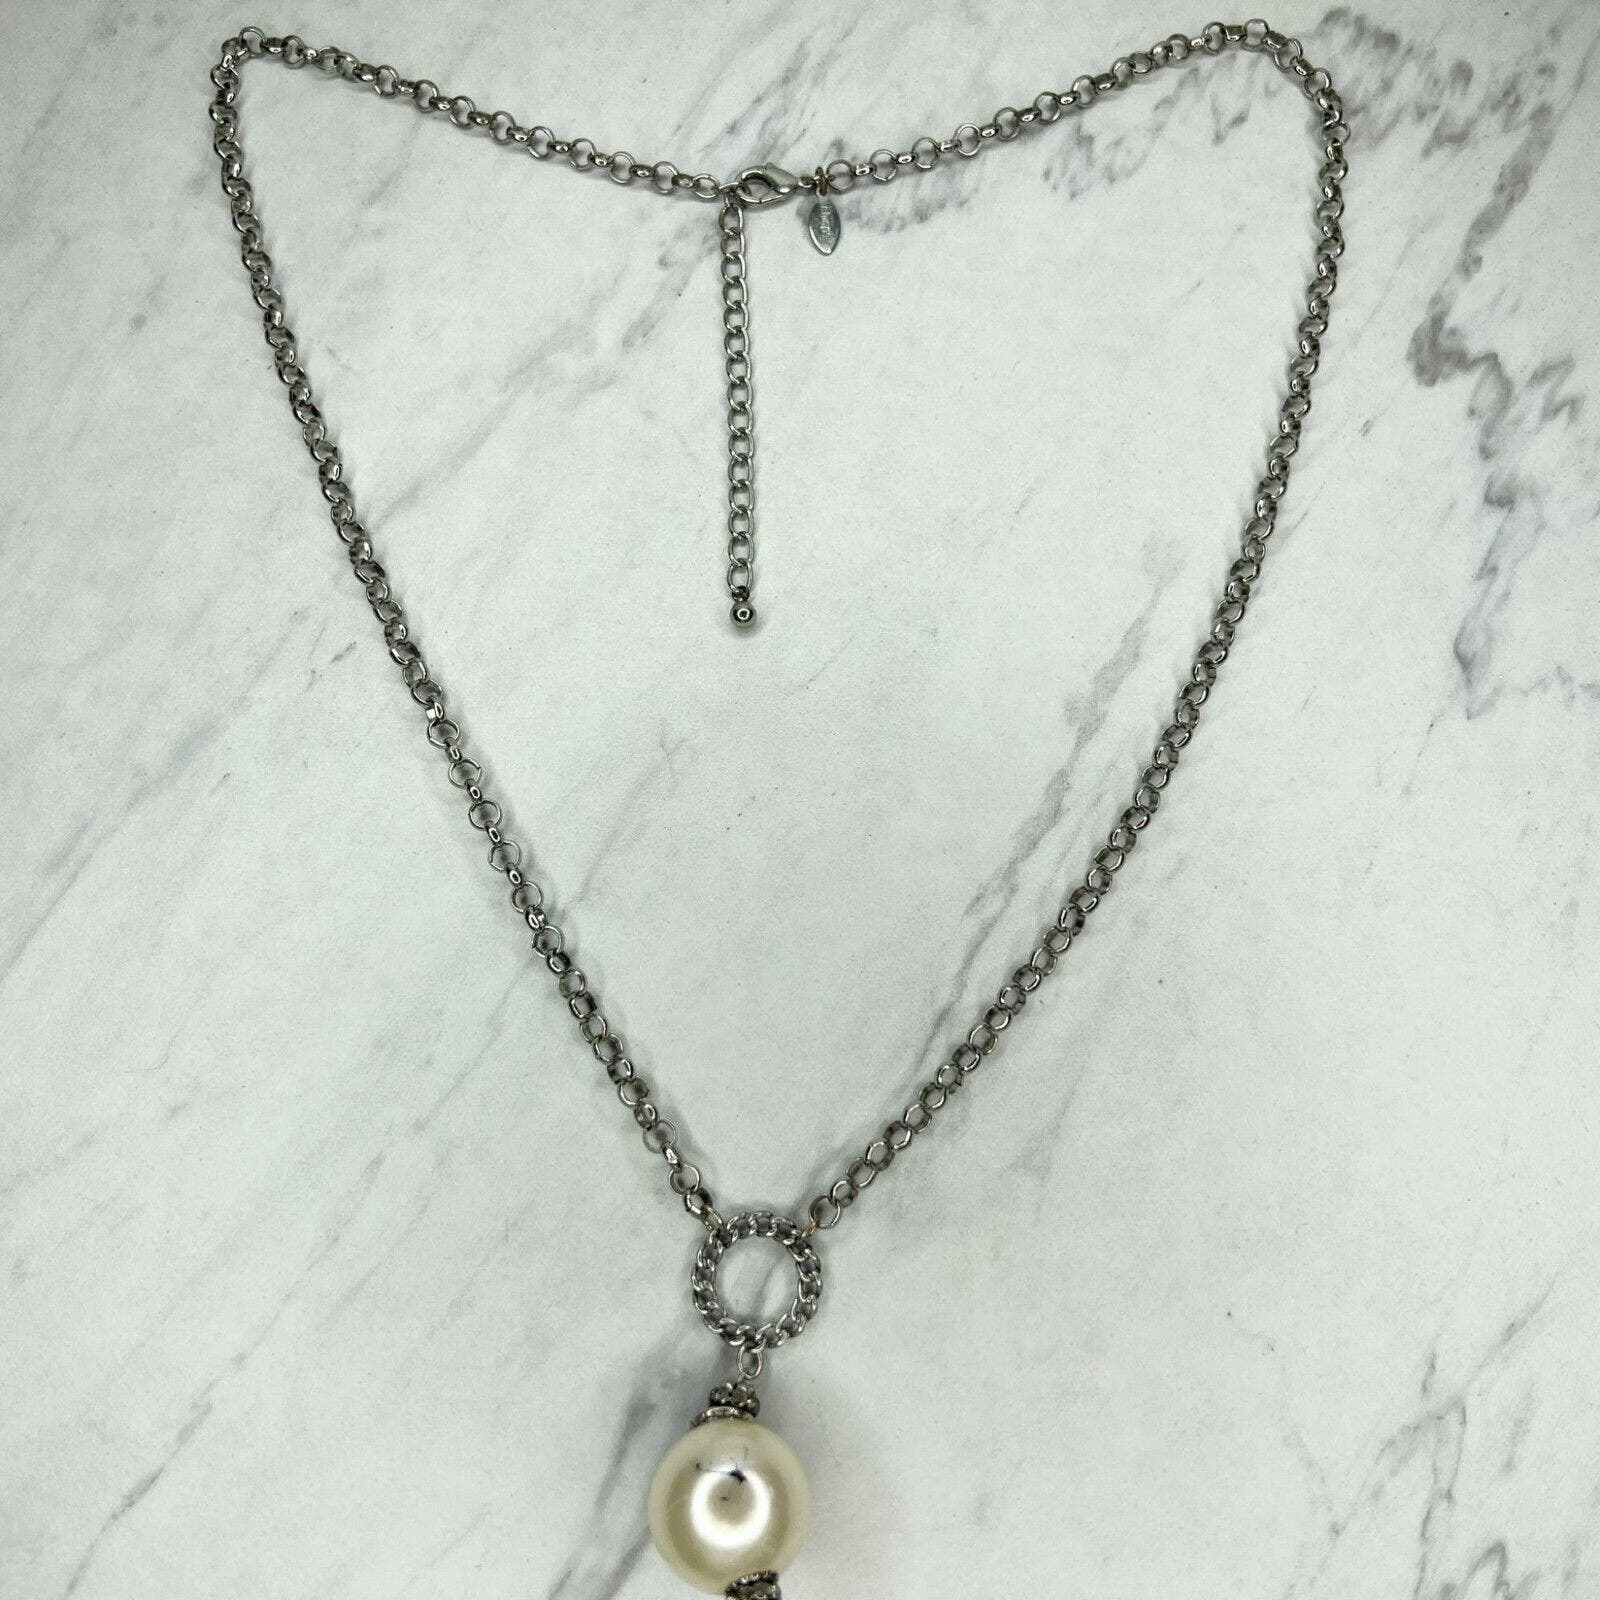 Primary image for Chico's Silver Tone Chain Link Faux Pearl Rhinestone Pendant Necklace